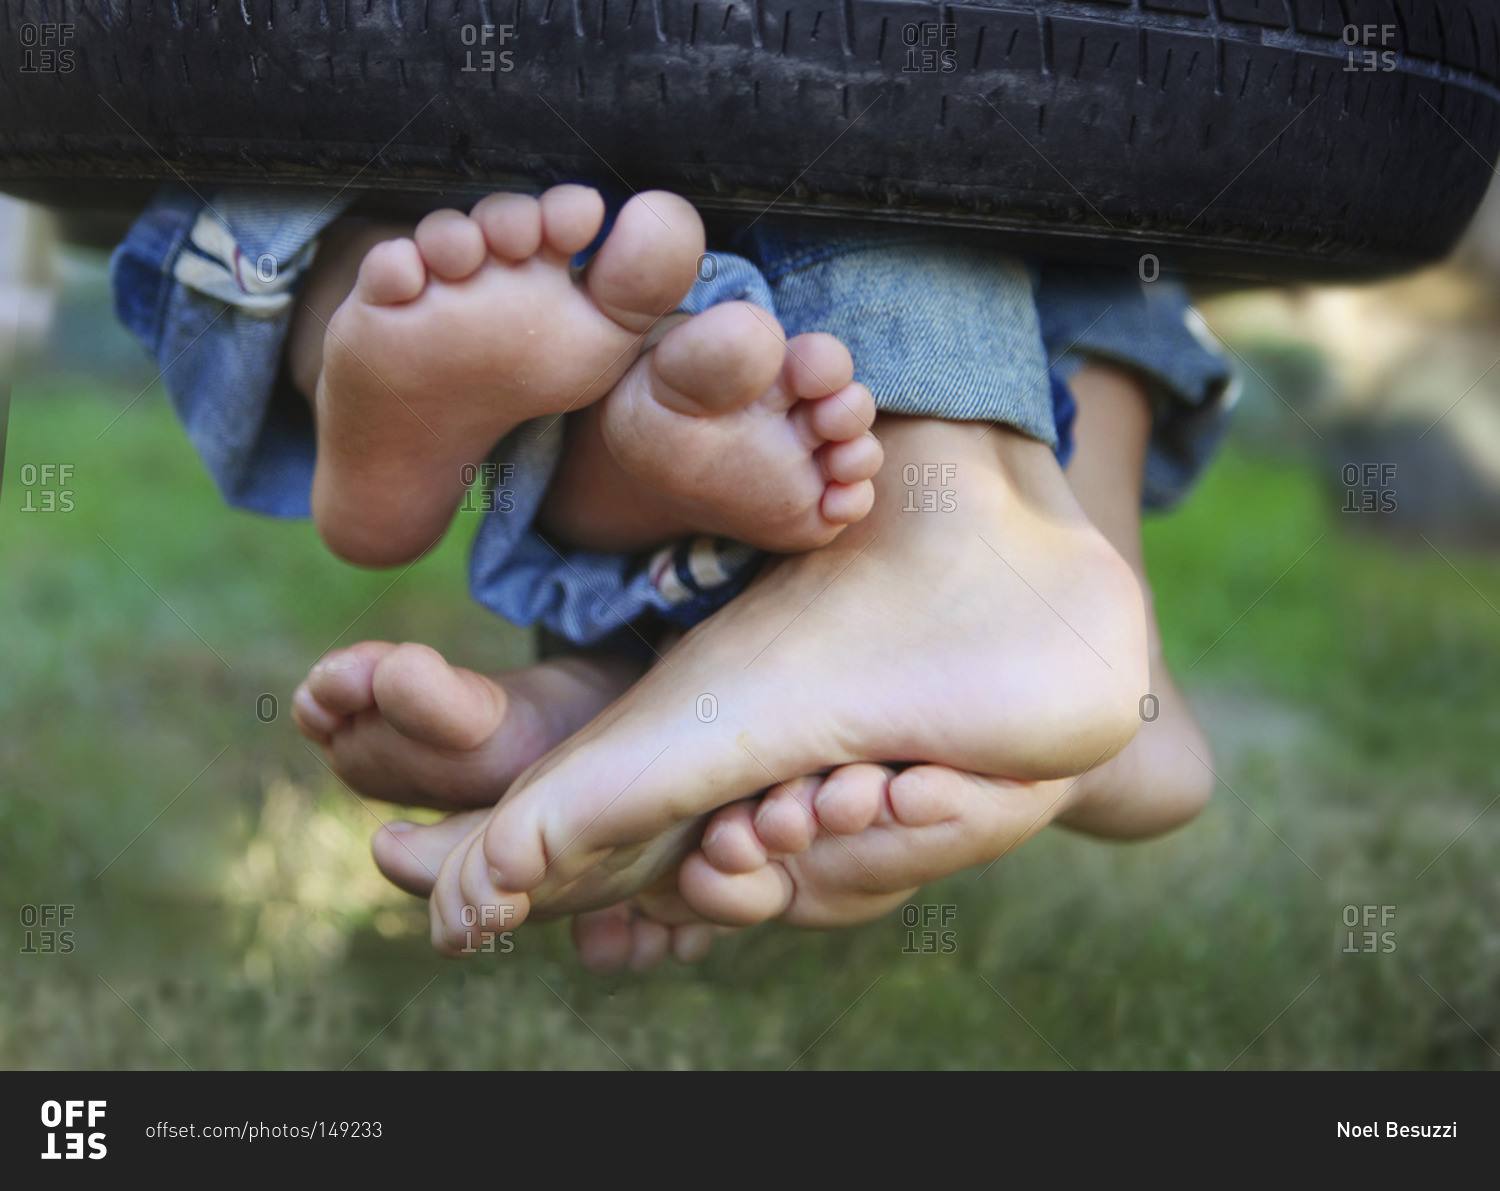 Kid's feet hanging from tire swing